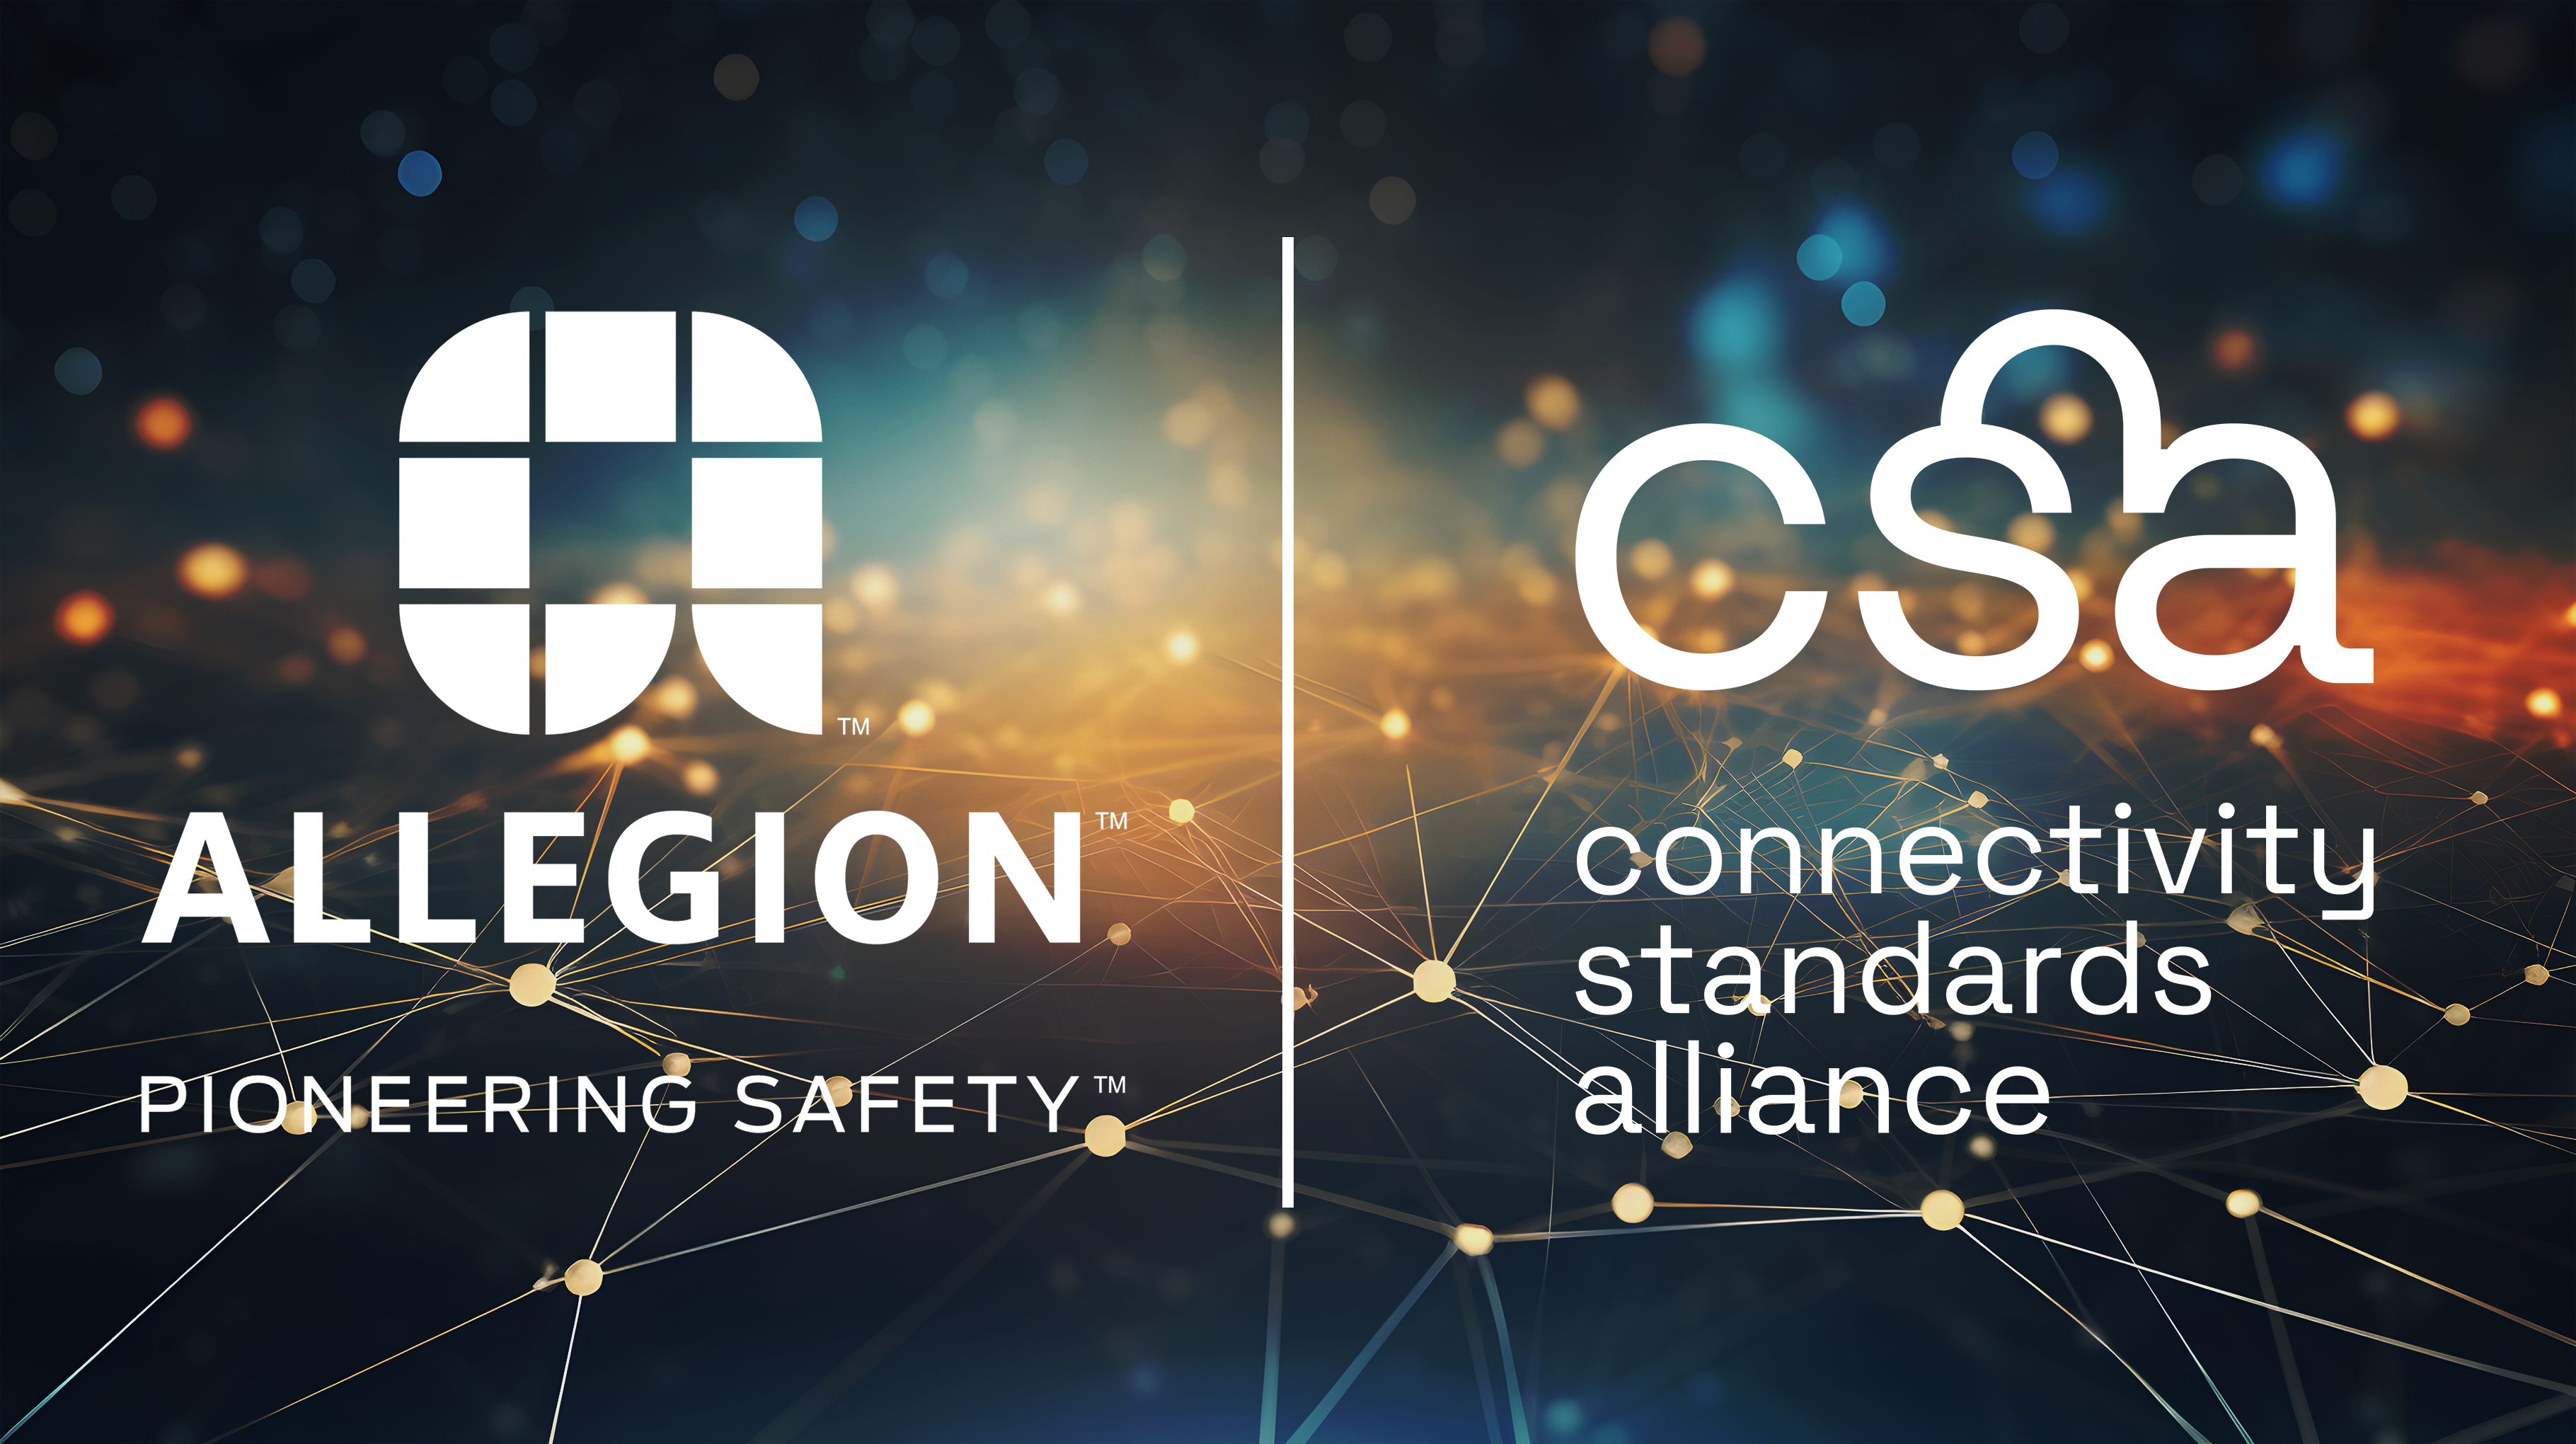 Allegion named a Promoter Member of the Connectivity Standards Alliance